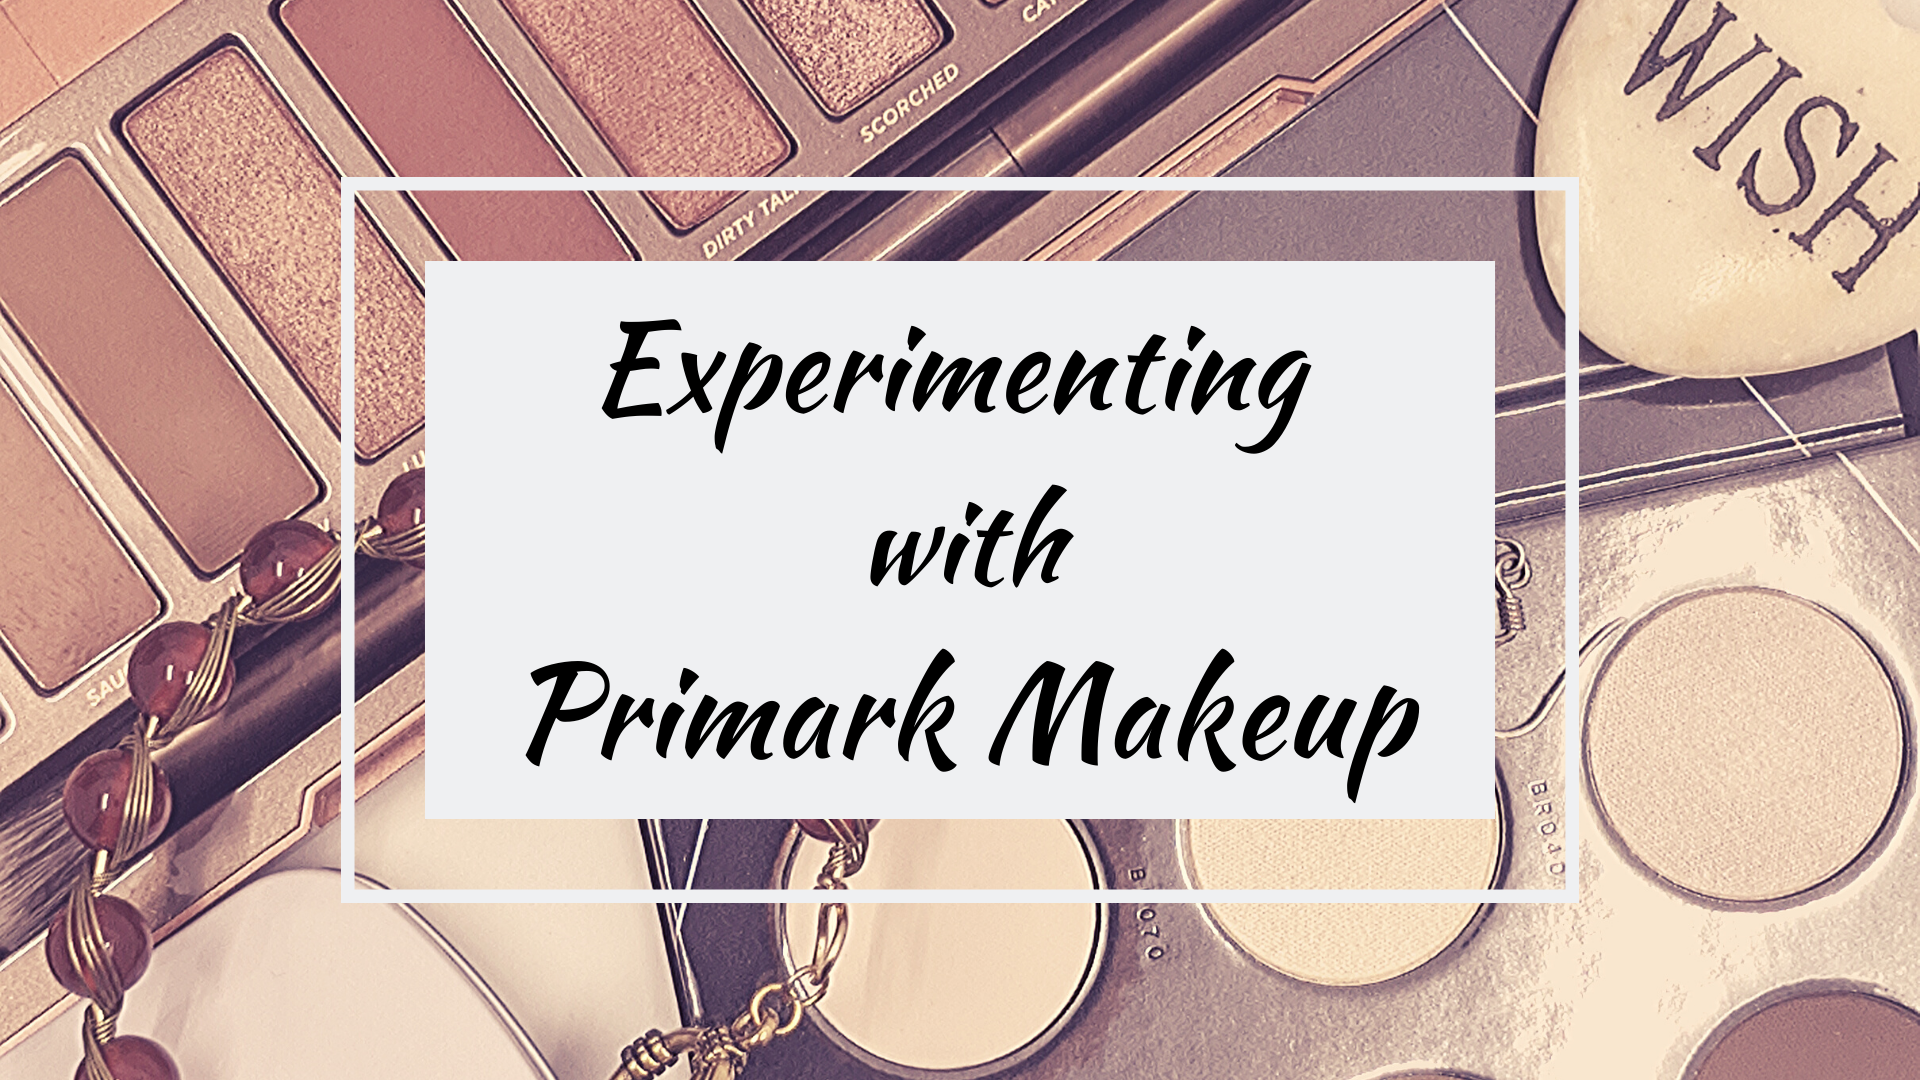 Blog cover for Experimenting with Primark Makeup post